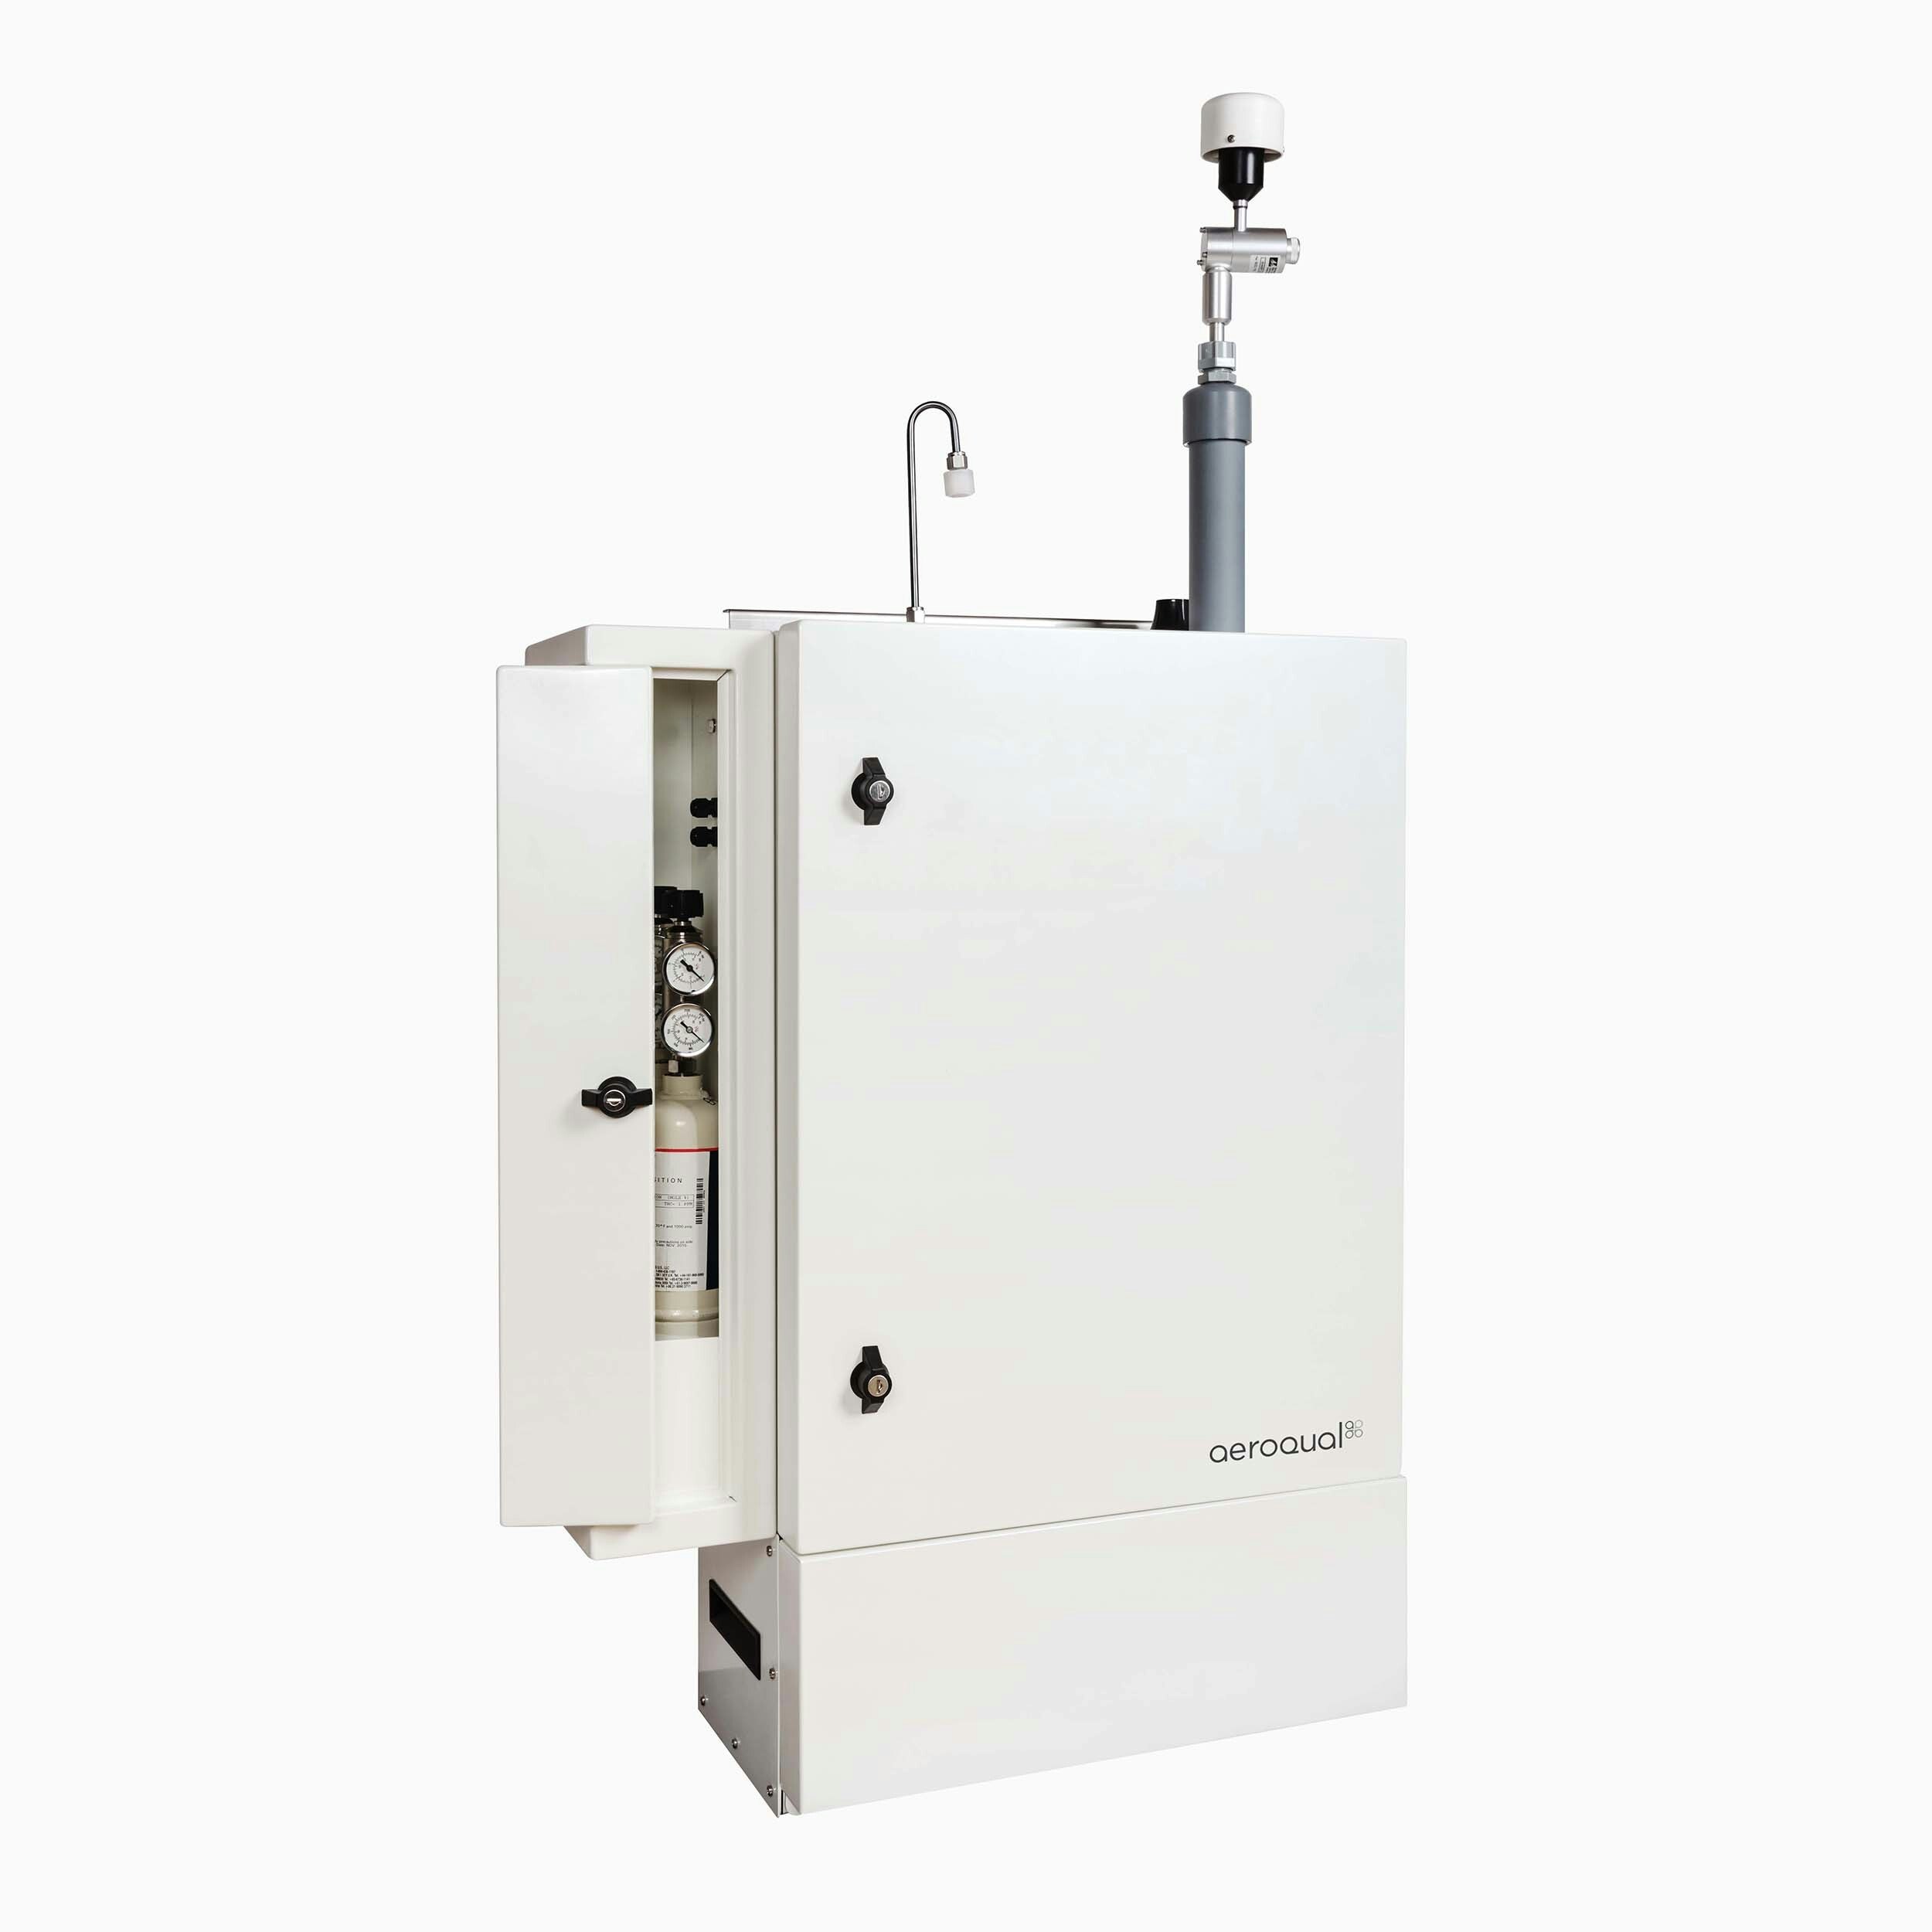 AQM 65 Air Monitoring Station with Integrated Calibration